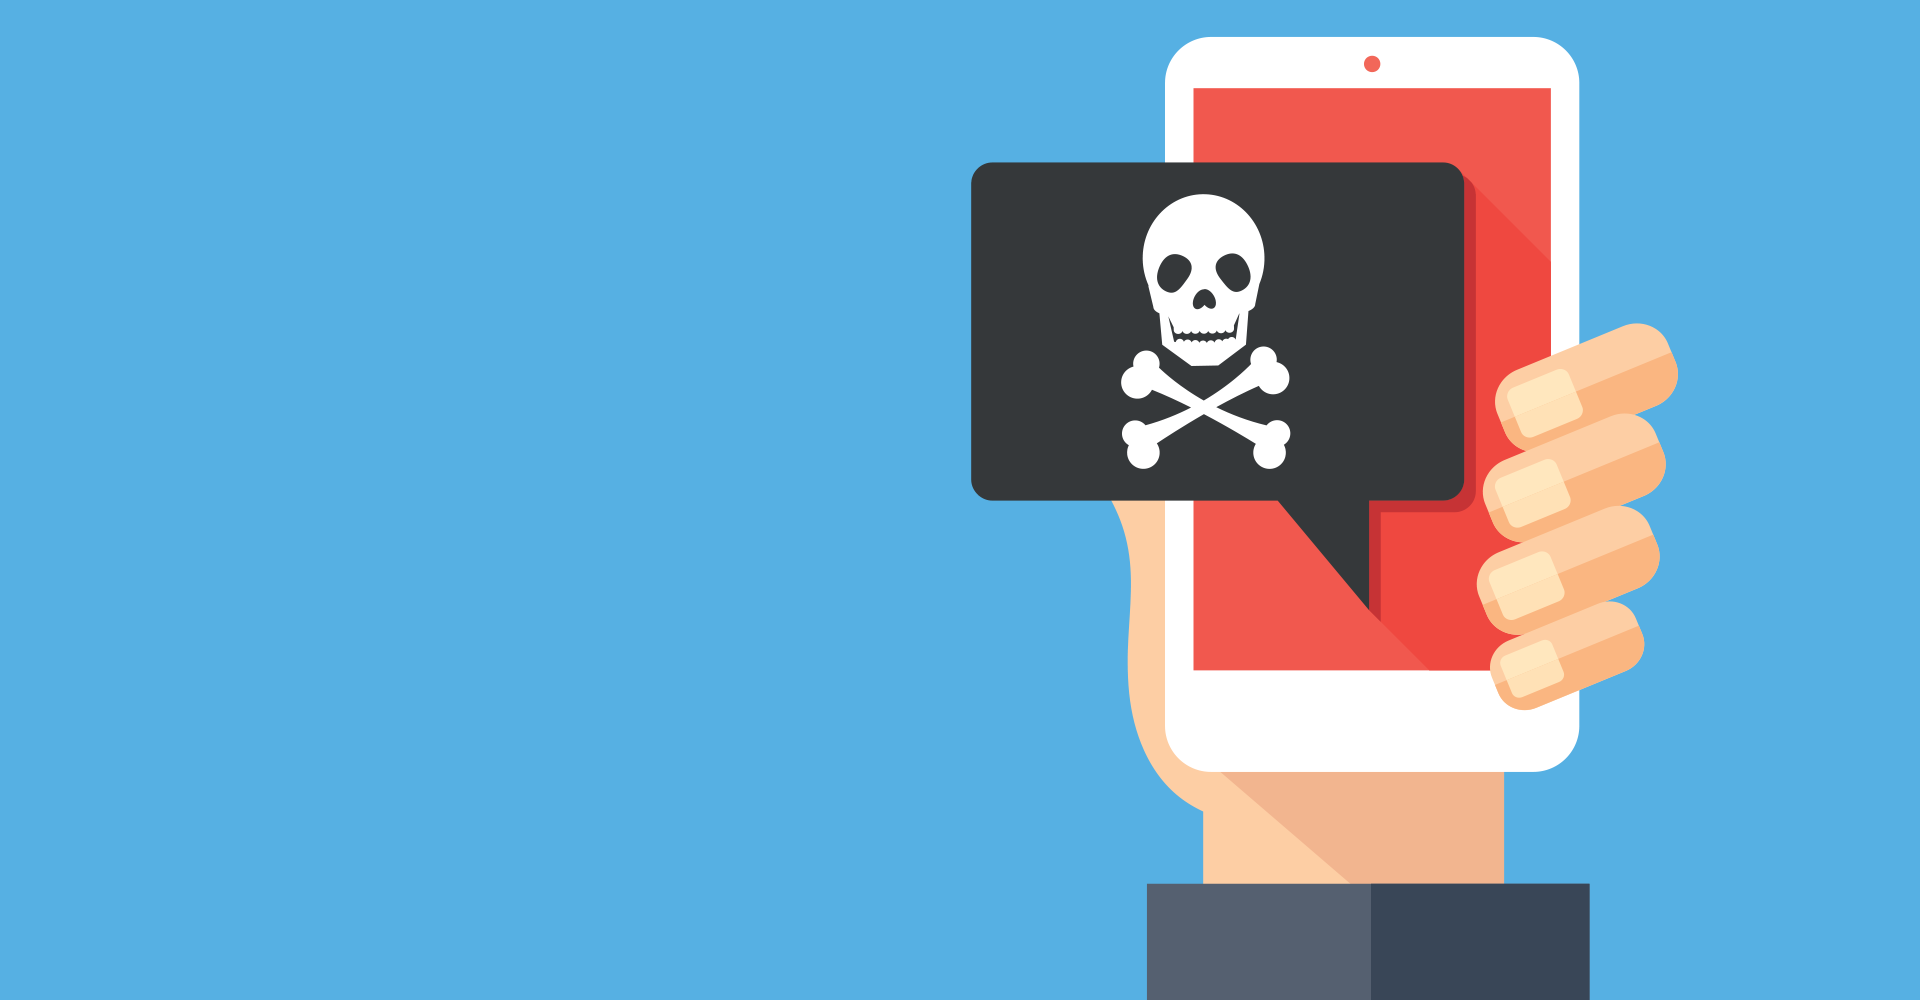 Illustration of a hand holding an smartphone with a skull and cross bones which represents malware-infected .zip domains.